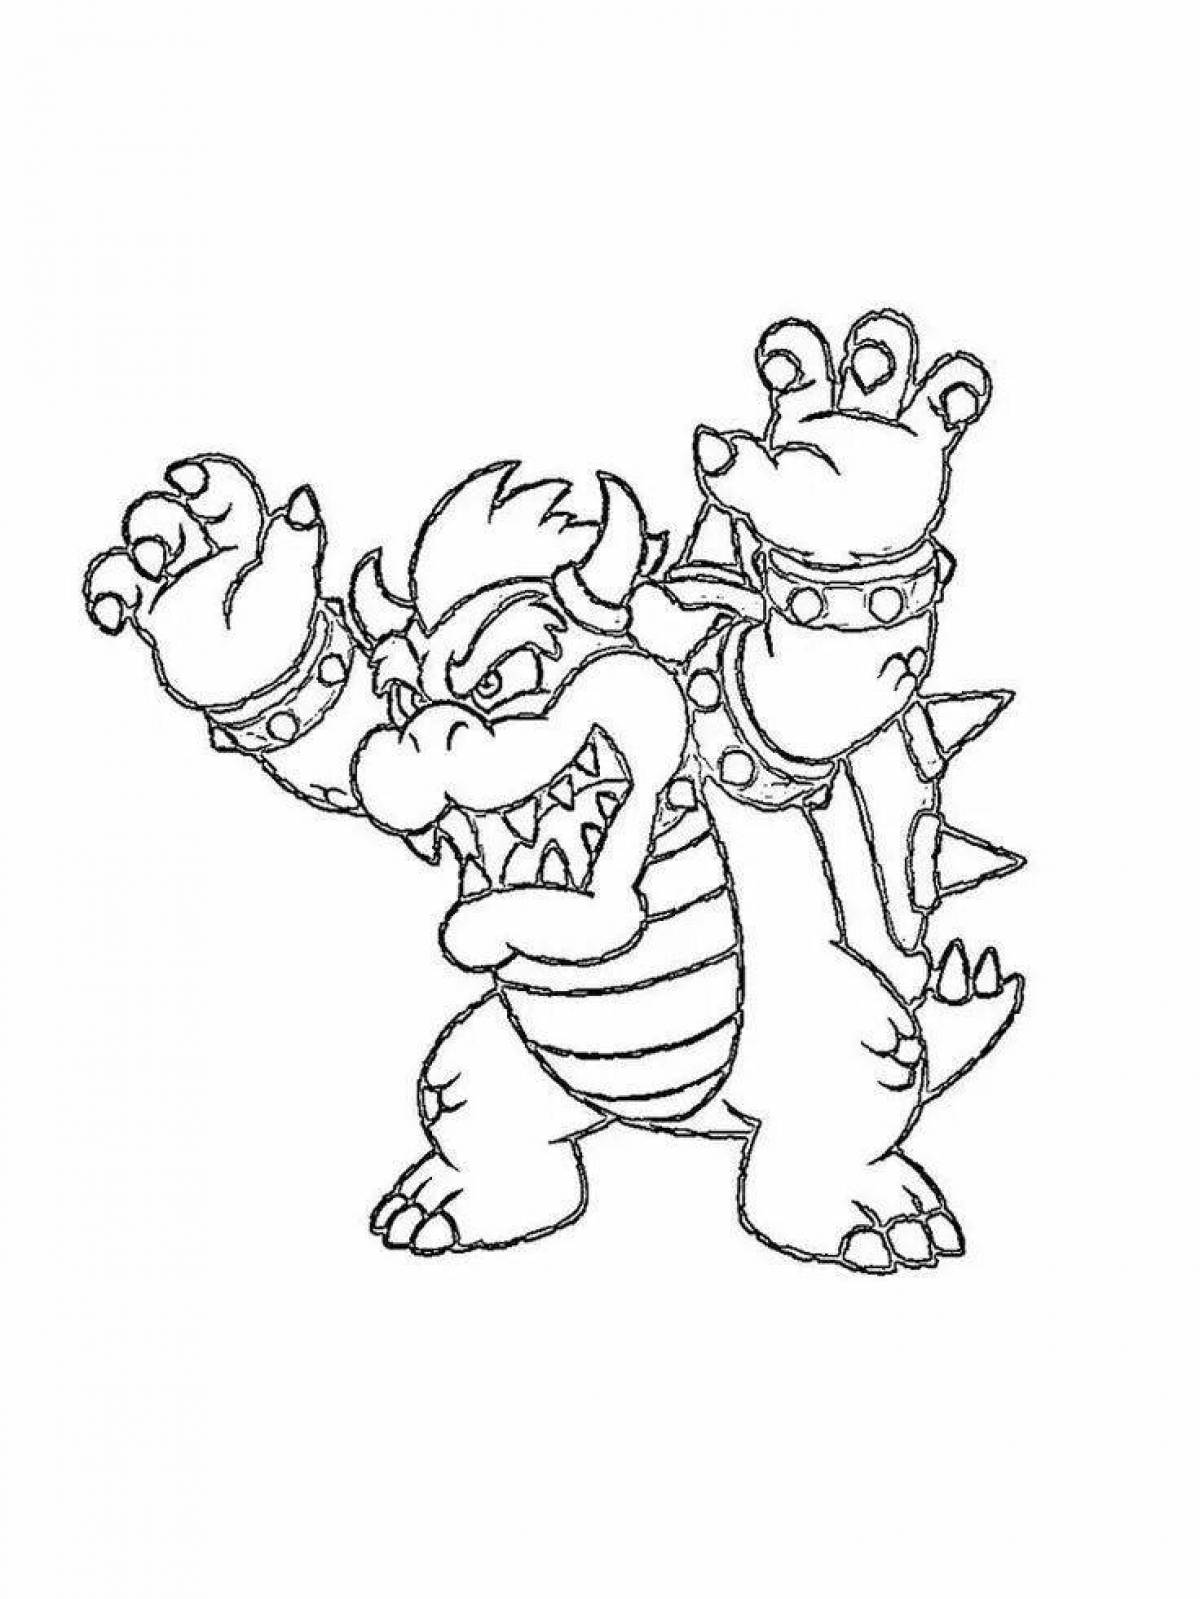 Bowser glowing coloring book